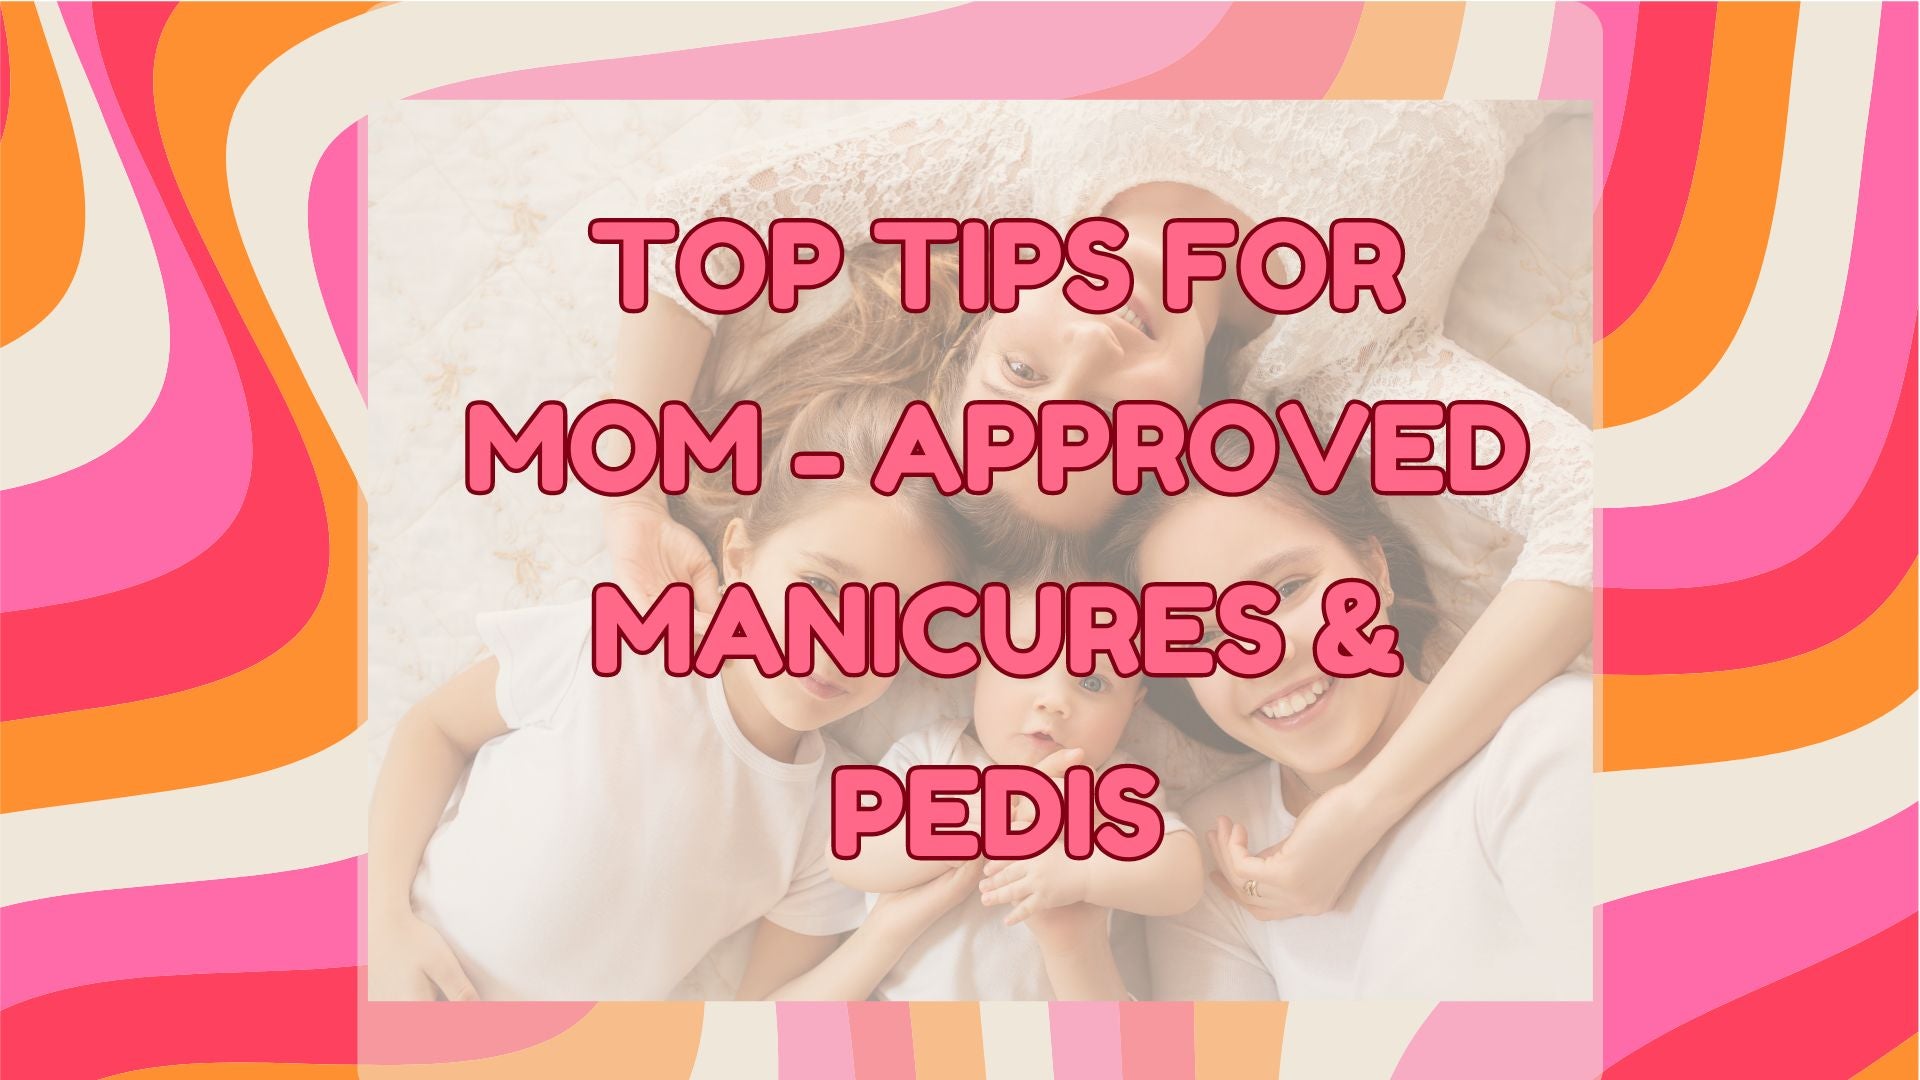 What is the Best Way for Moms to do Nail Manicures and Pedis?